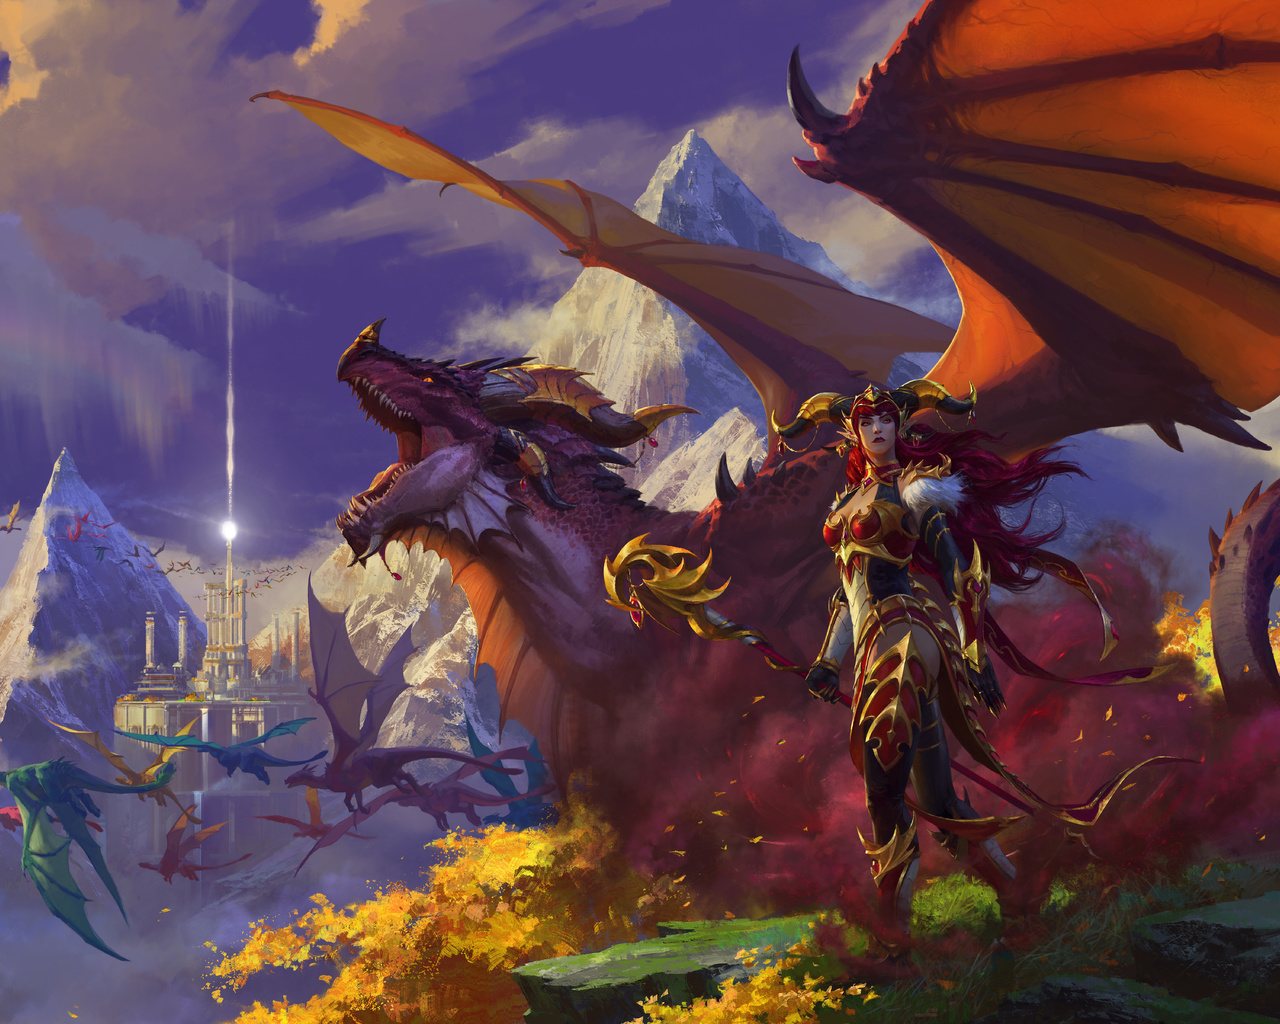 world of warcraft dragonflight, massively multiplayer online role-playing game, blizzard entertainment